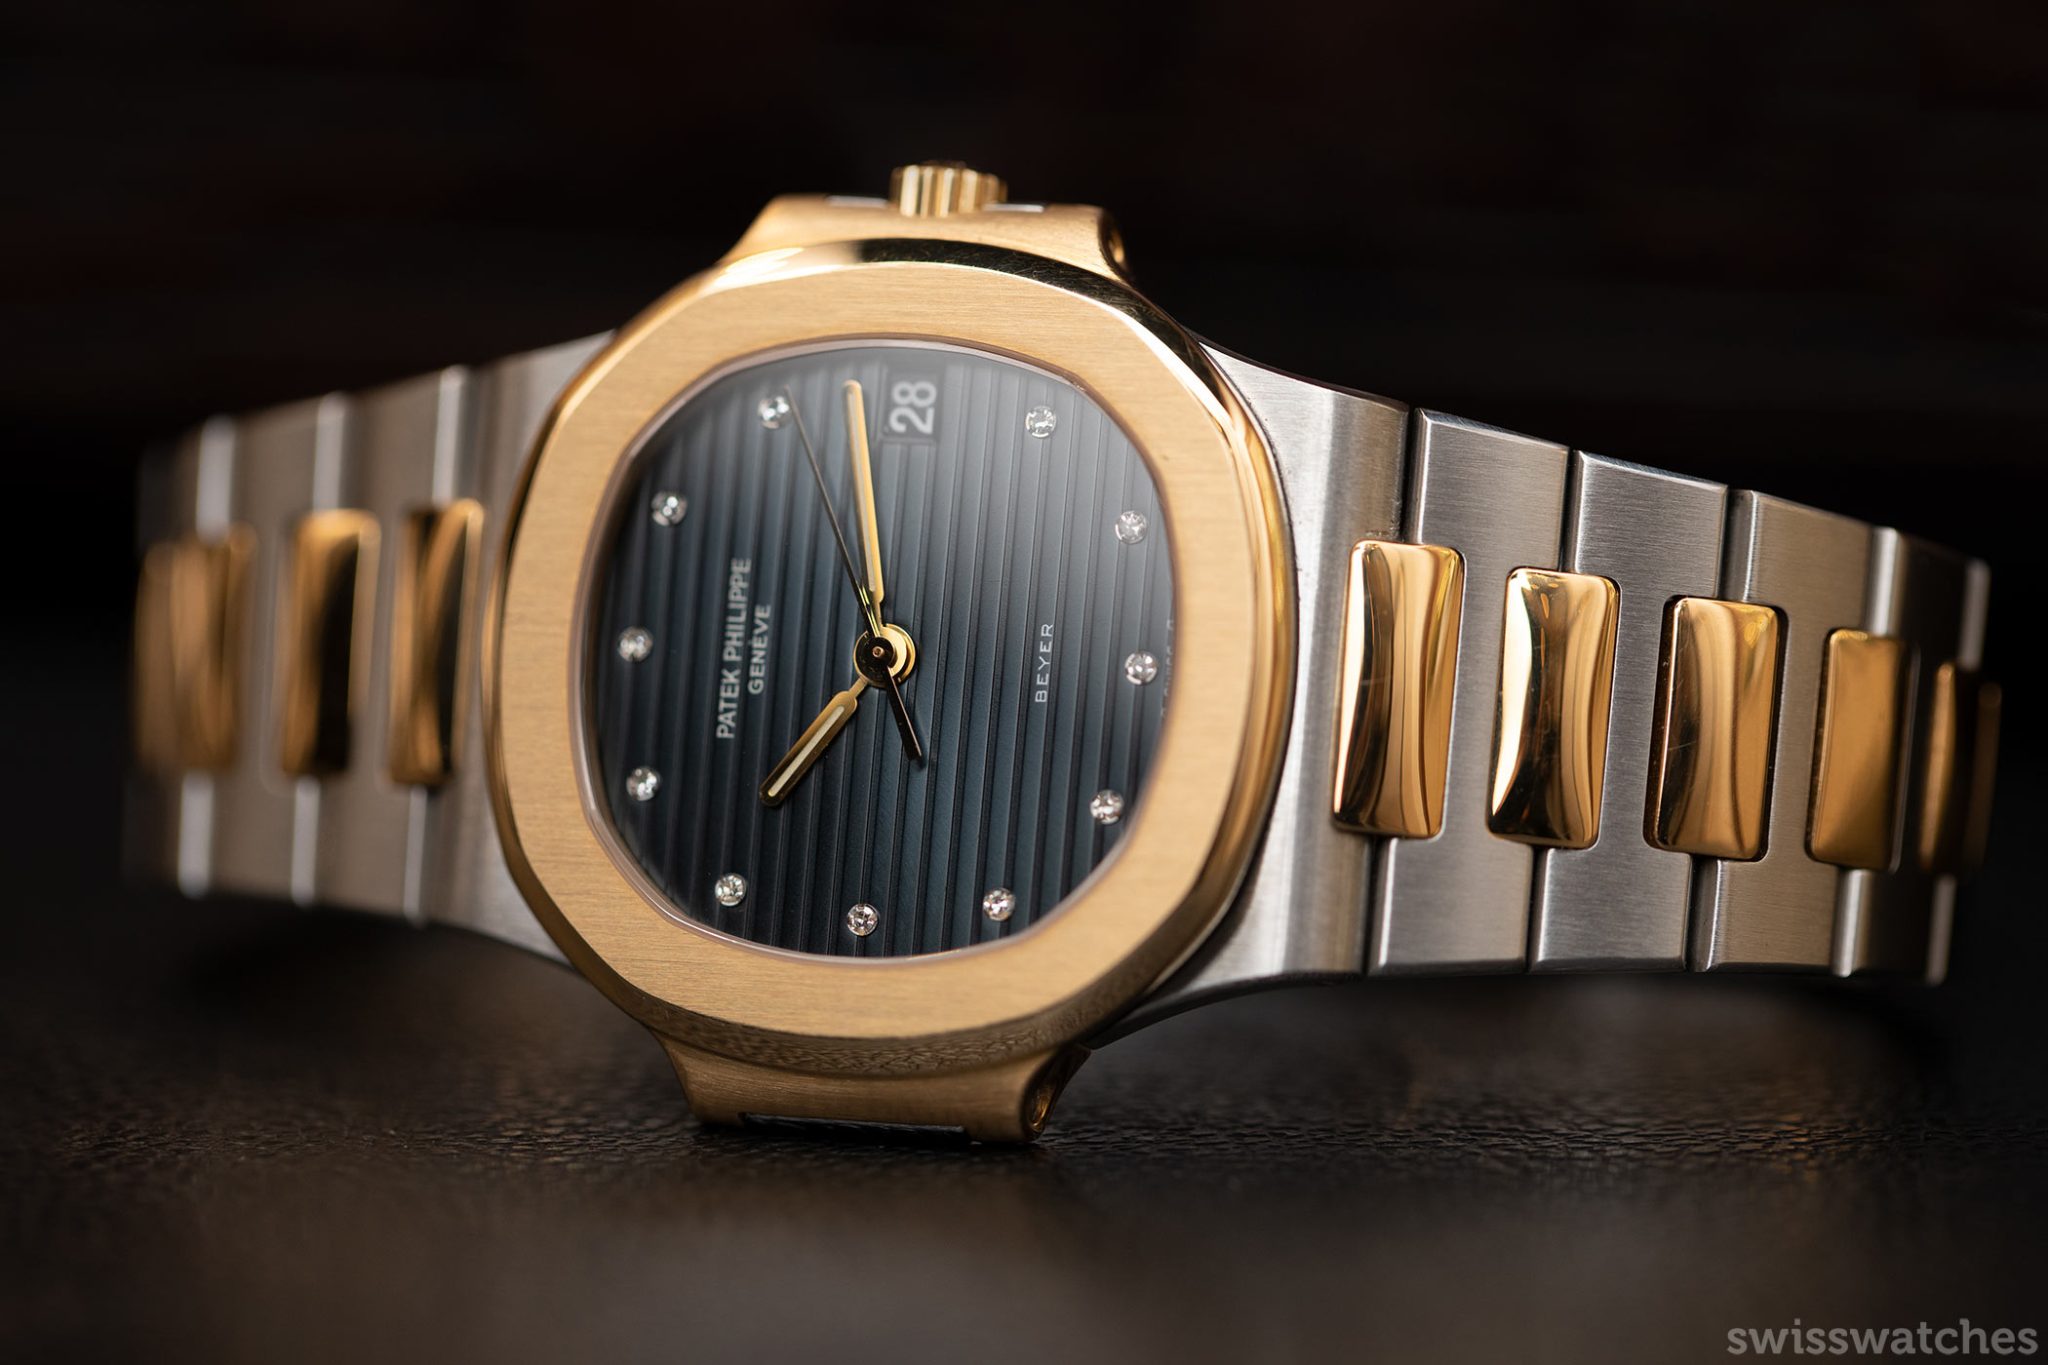 Patek Philippe: a family-owned company that has existed for